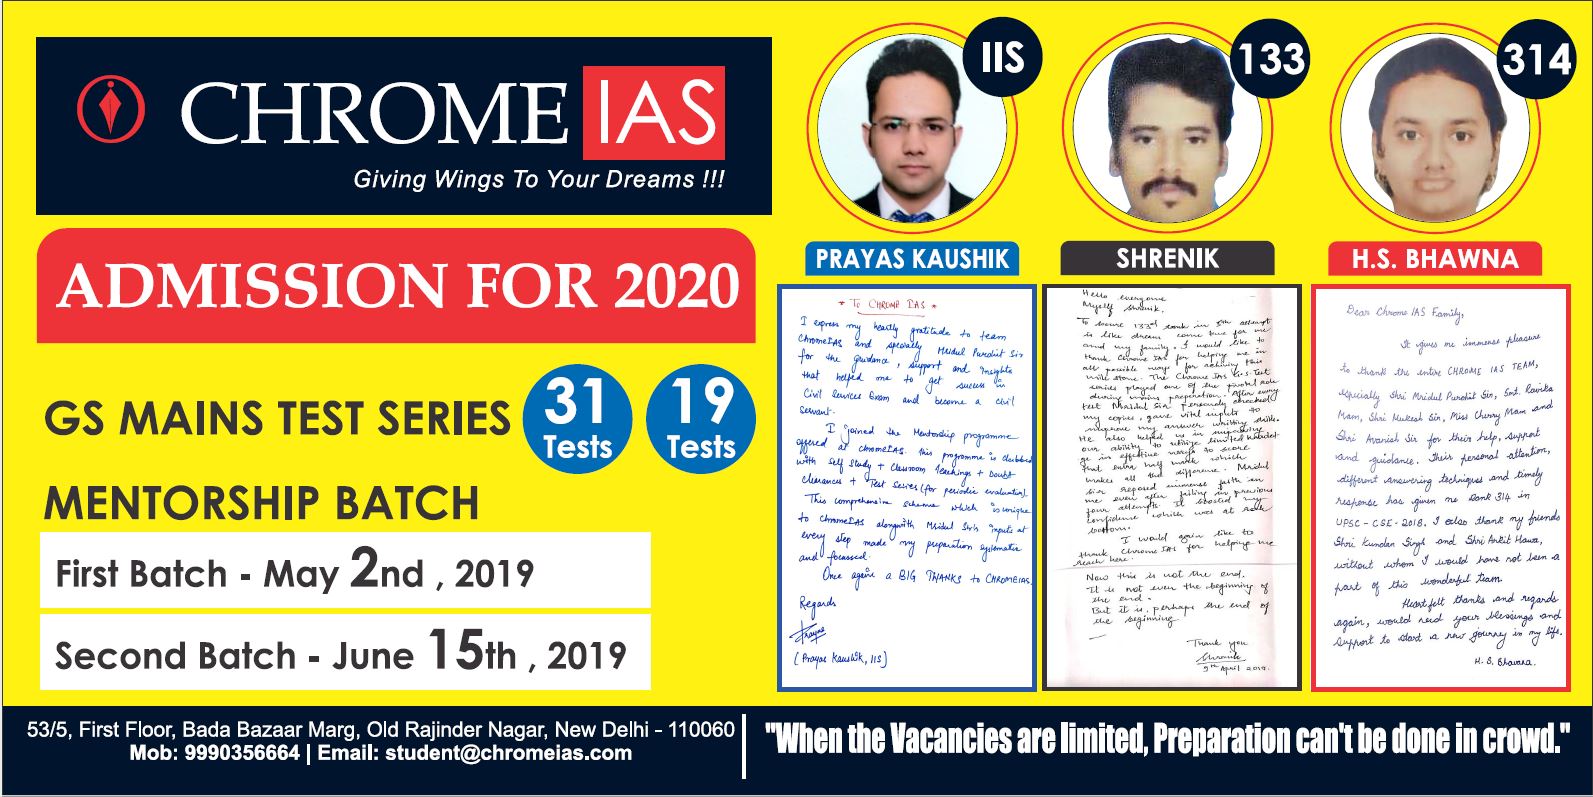 GS MAINS TEST SERIES - offered by Chrome IAS Academy Delhi